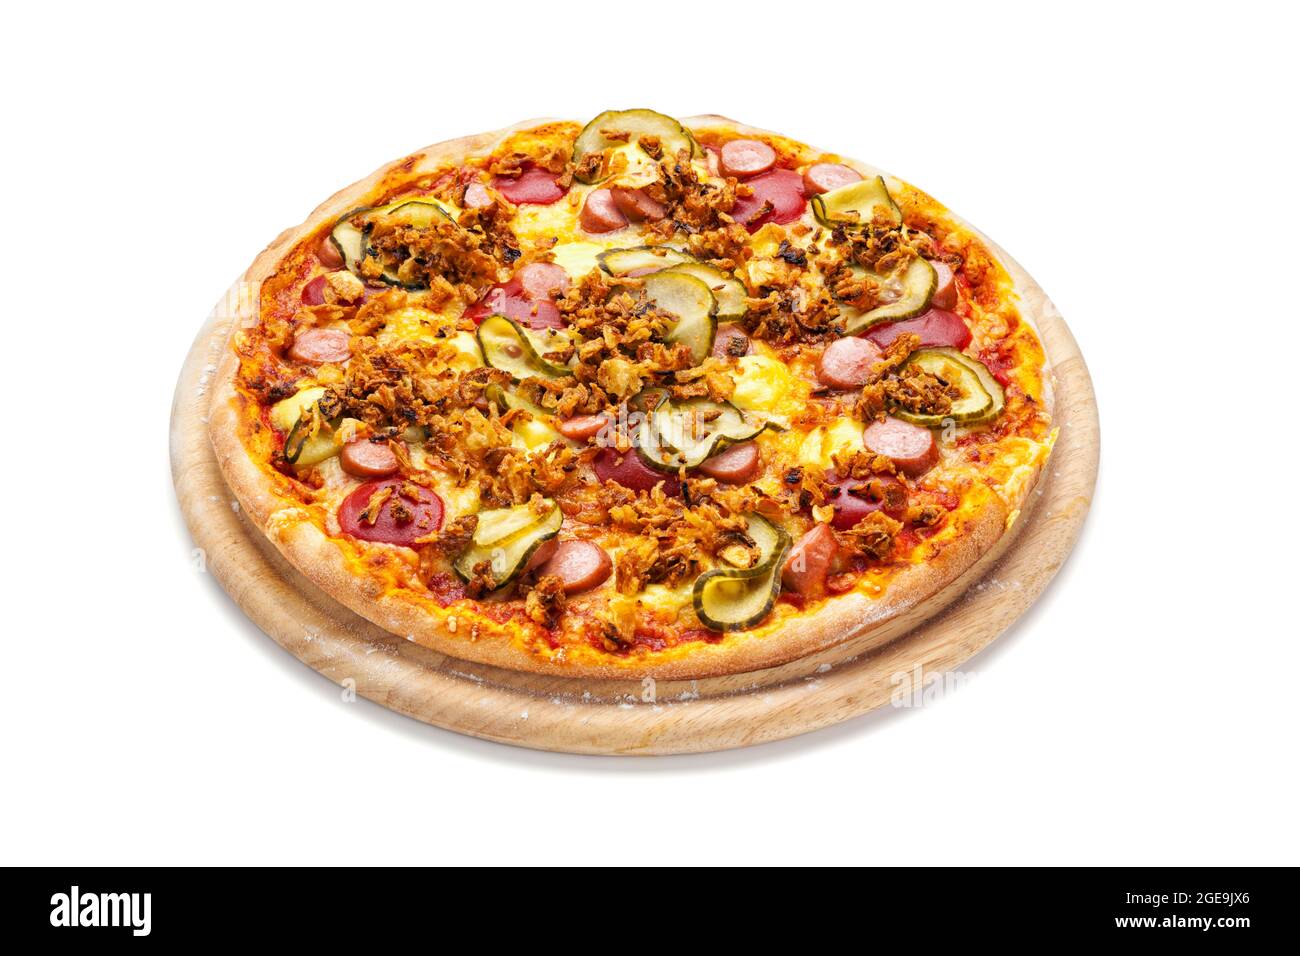 Hot Dog style pizza with sausage, roast onions, pickled cucumber slices and remoulade on wooden platter isolated on white with clipping path Stock Photo